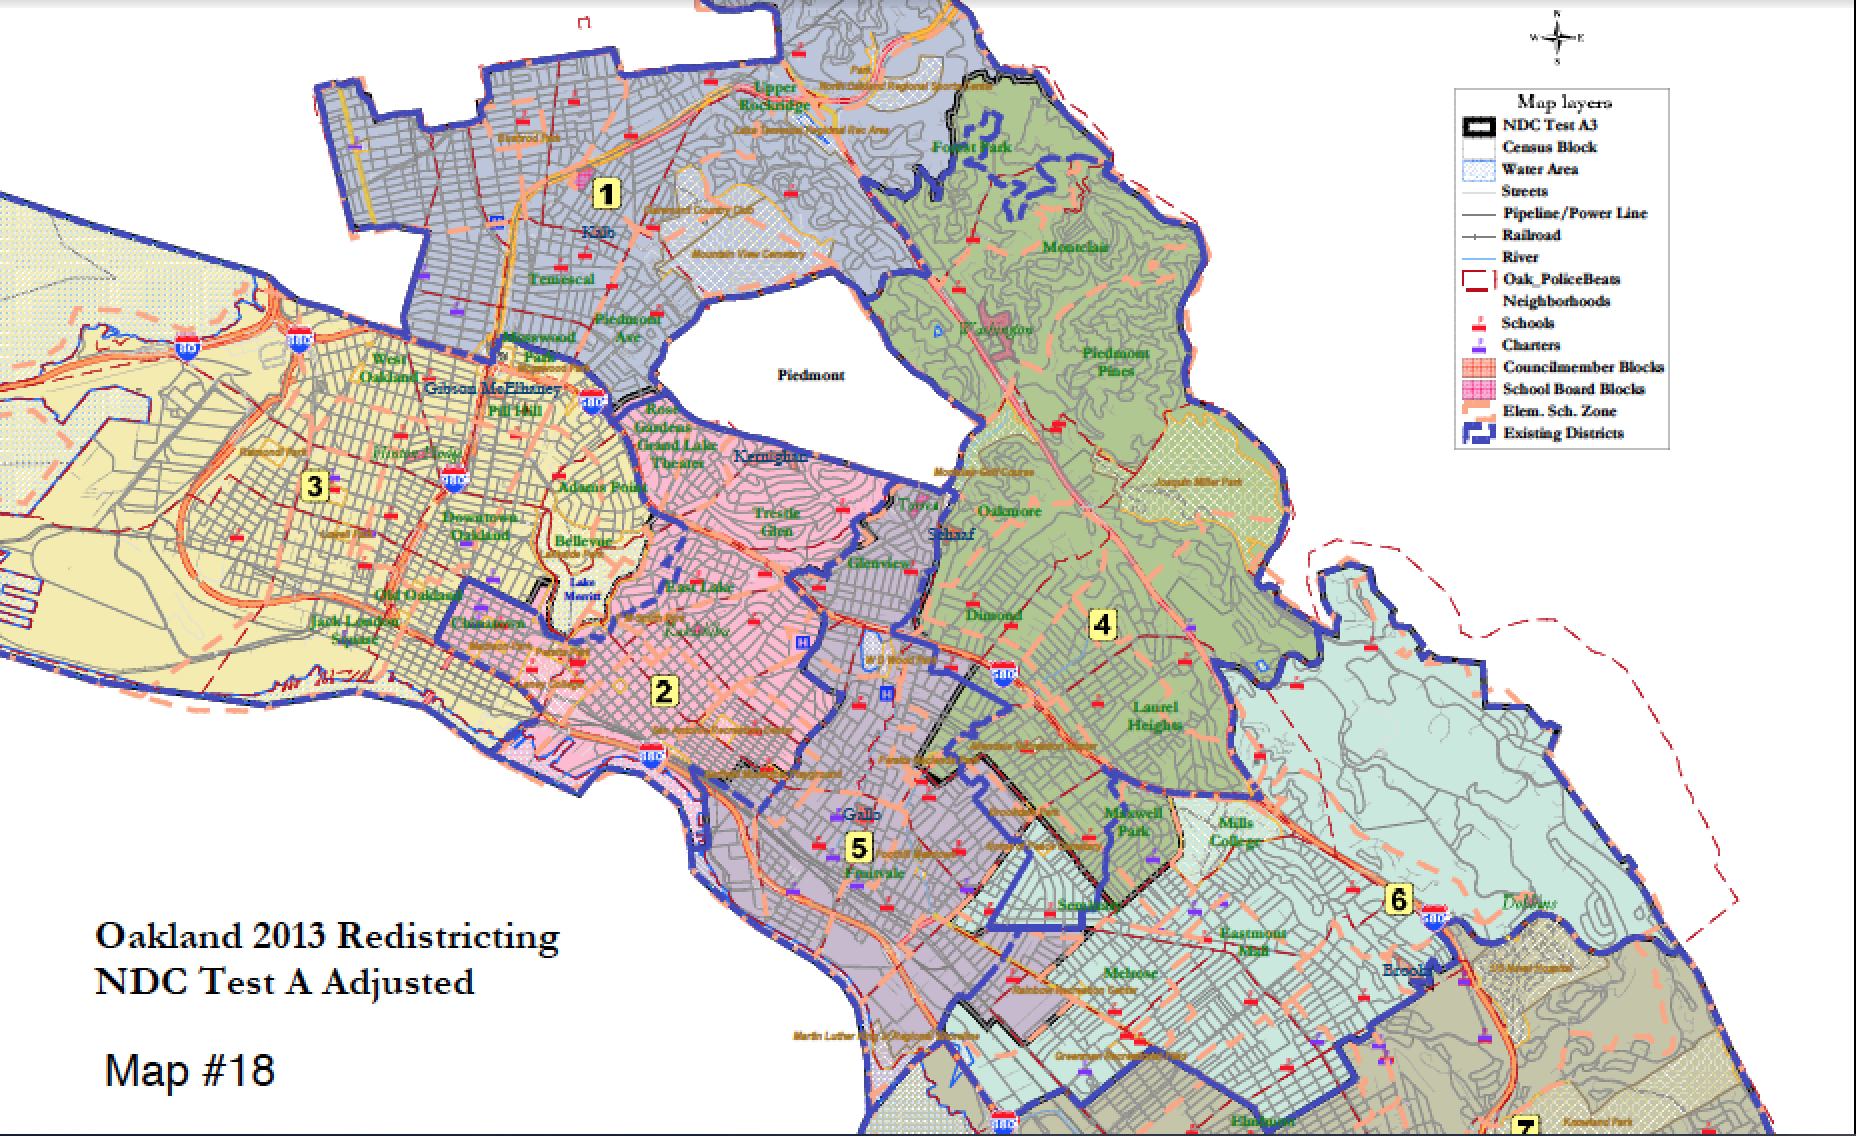 "Communities of interest" at forefront of redistricting talks - Oakland